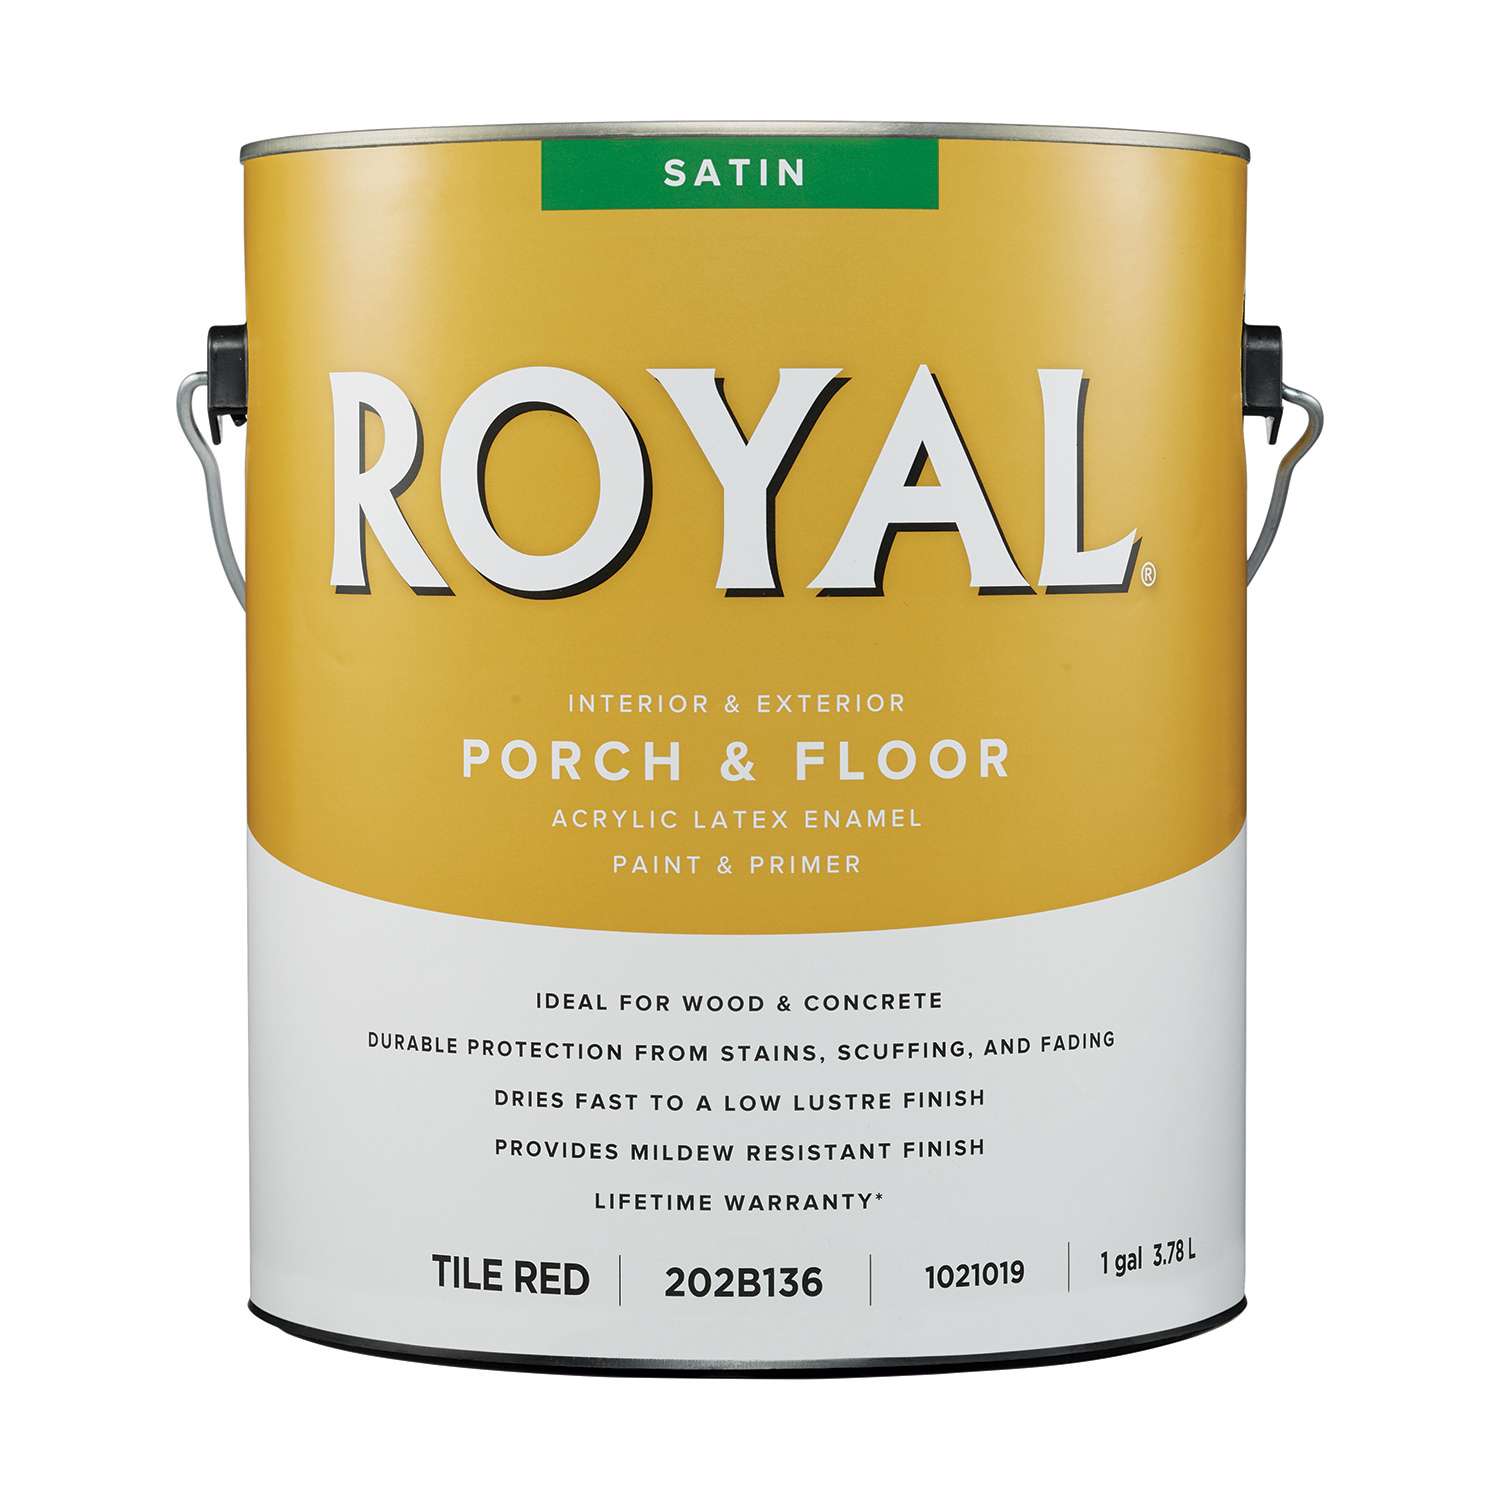 Repellent Scottish Basic theory Royal Satin Tile Red Porch and Floor Paint+Primer 1 gal - Ace Hardware